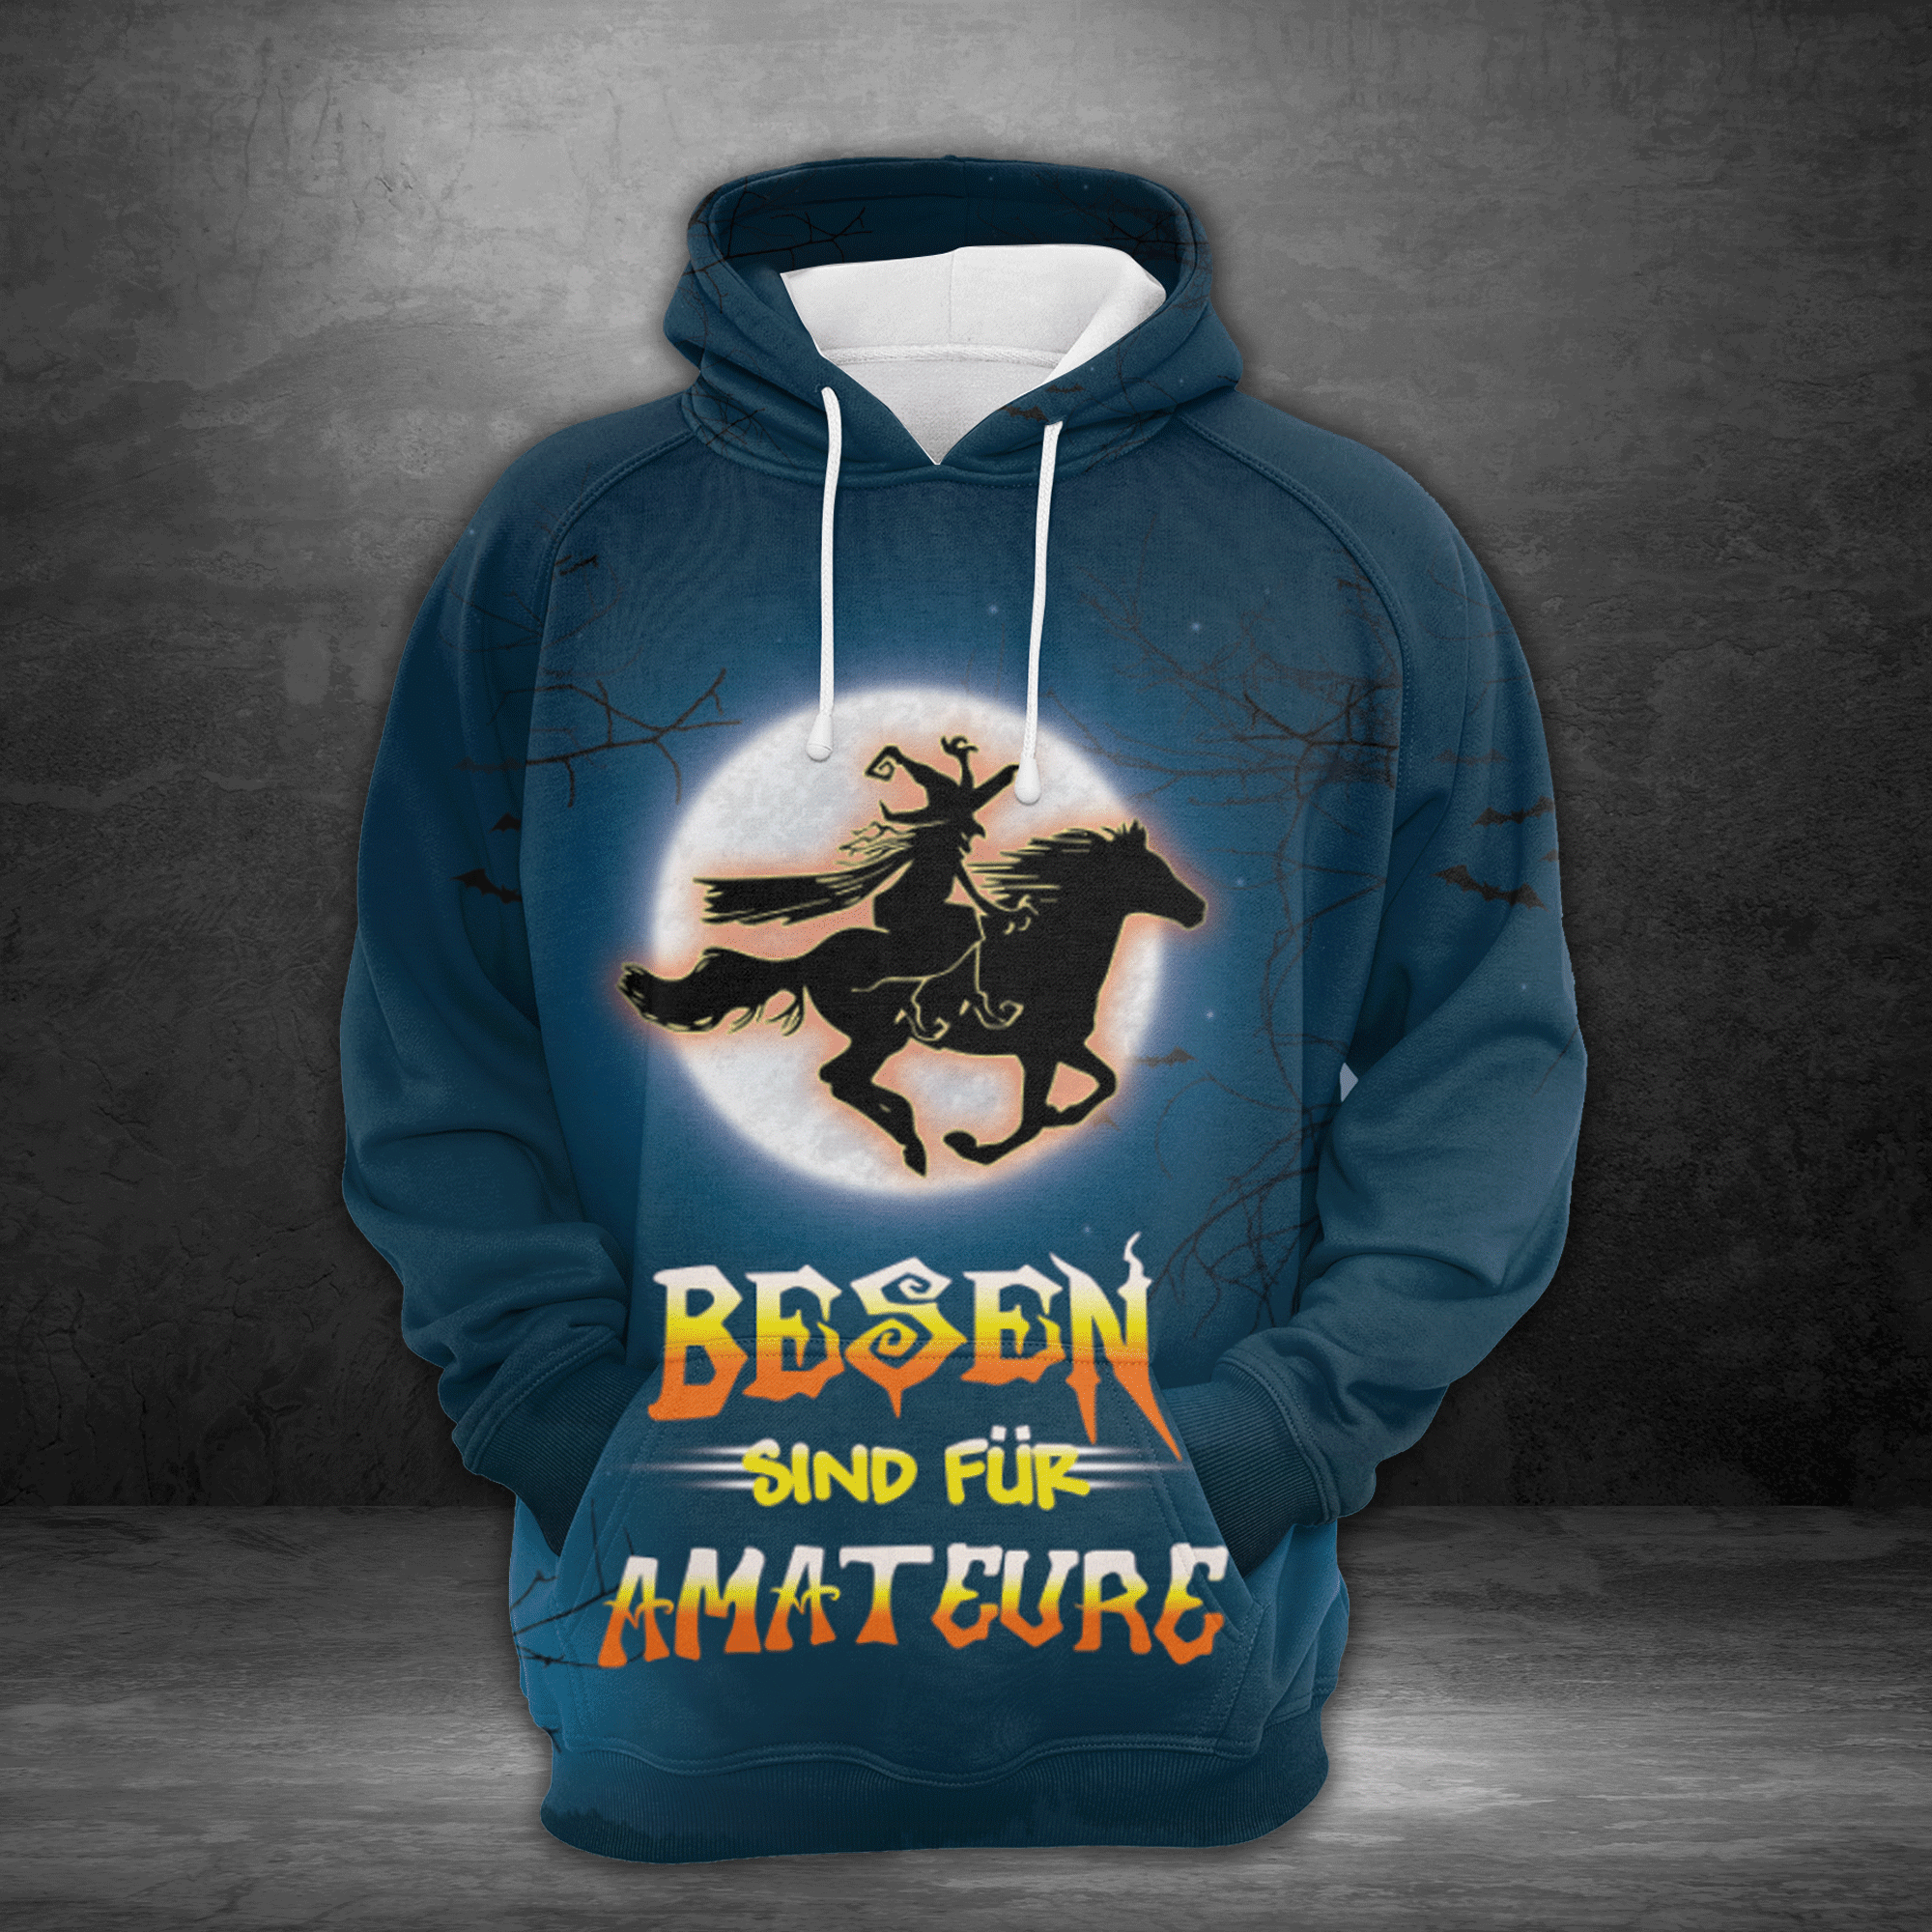 Witch Riding Horse Pullover Premium Hoodie Besen Sind Fur Amateure , Perfect Outfit For Men And Women On Christmas New Year Autumn Winter